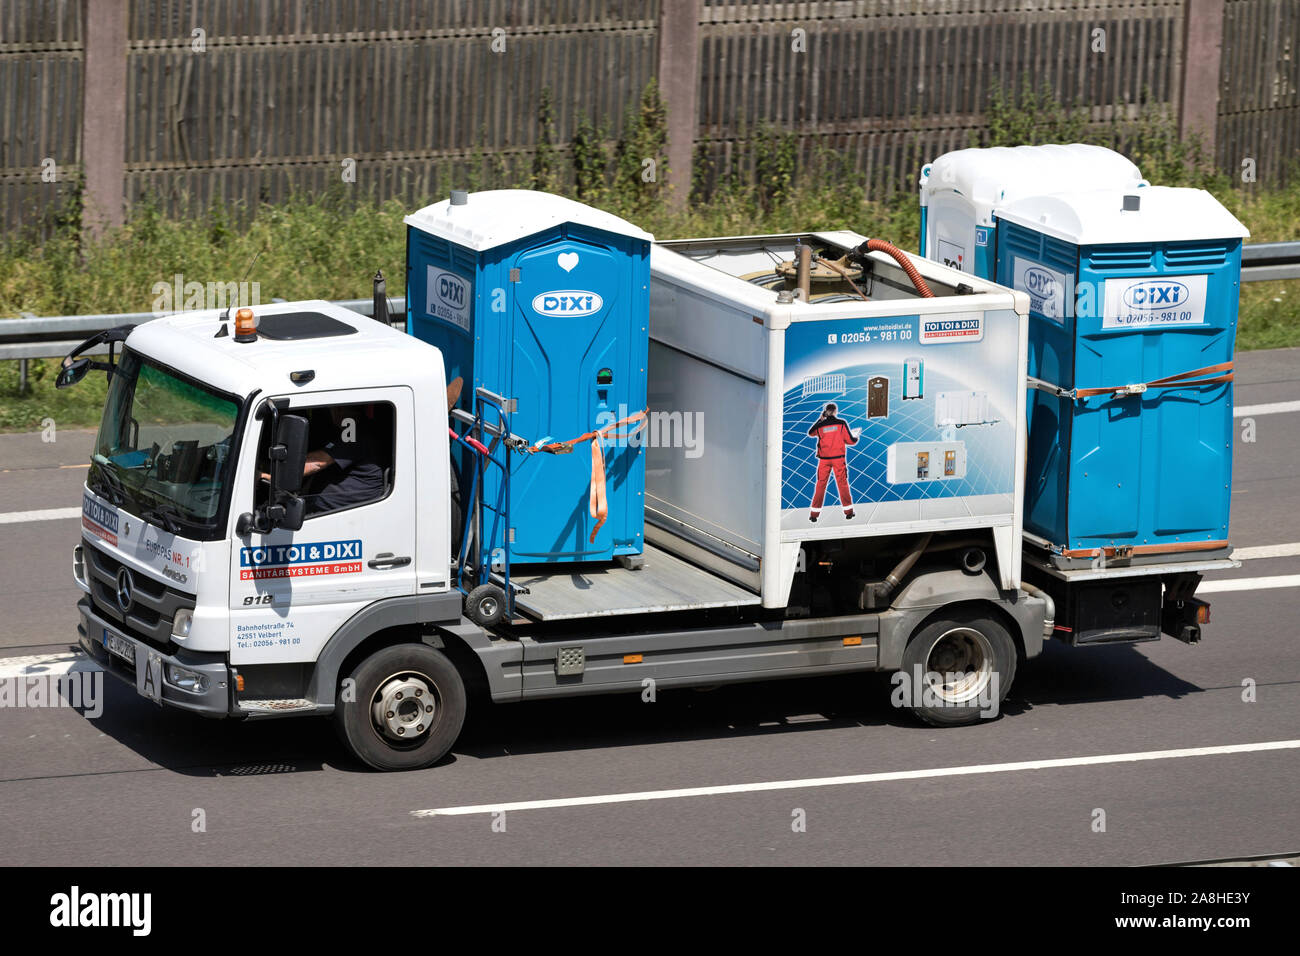 TOI TOI & DIXI truck on motorway. TOI TOI & DIXI (ADCO Group) is the largest mobile sanitary solutions company, and is based in 33 countriesworldwide. Stock Photo